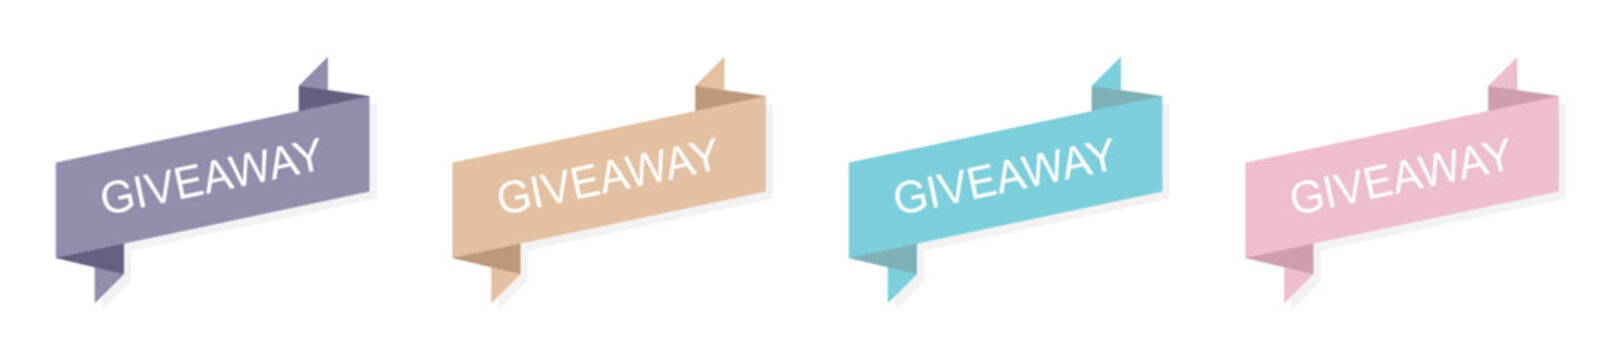 Giveaway banners in different colors. Giveaway ribbon poster template with shadow. Win a prize giveaway. Vector illustration.